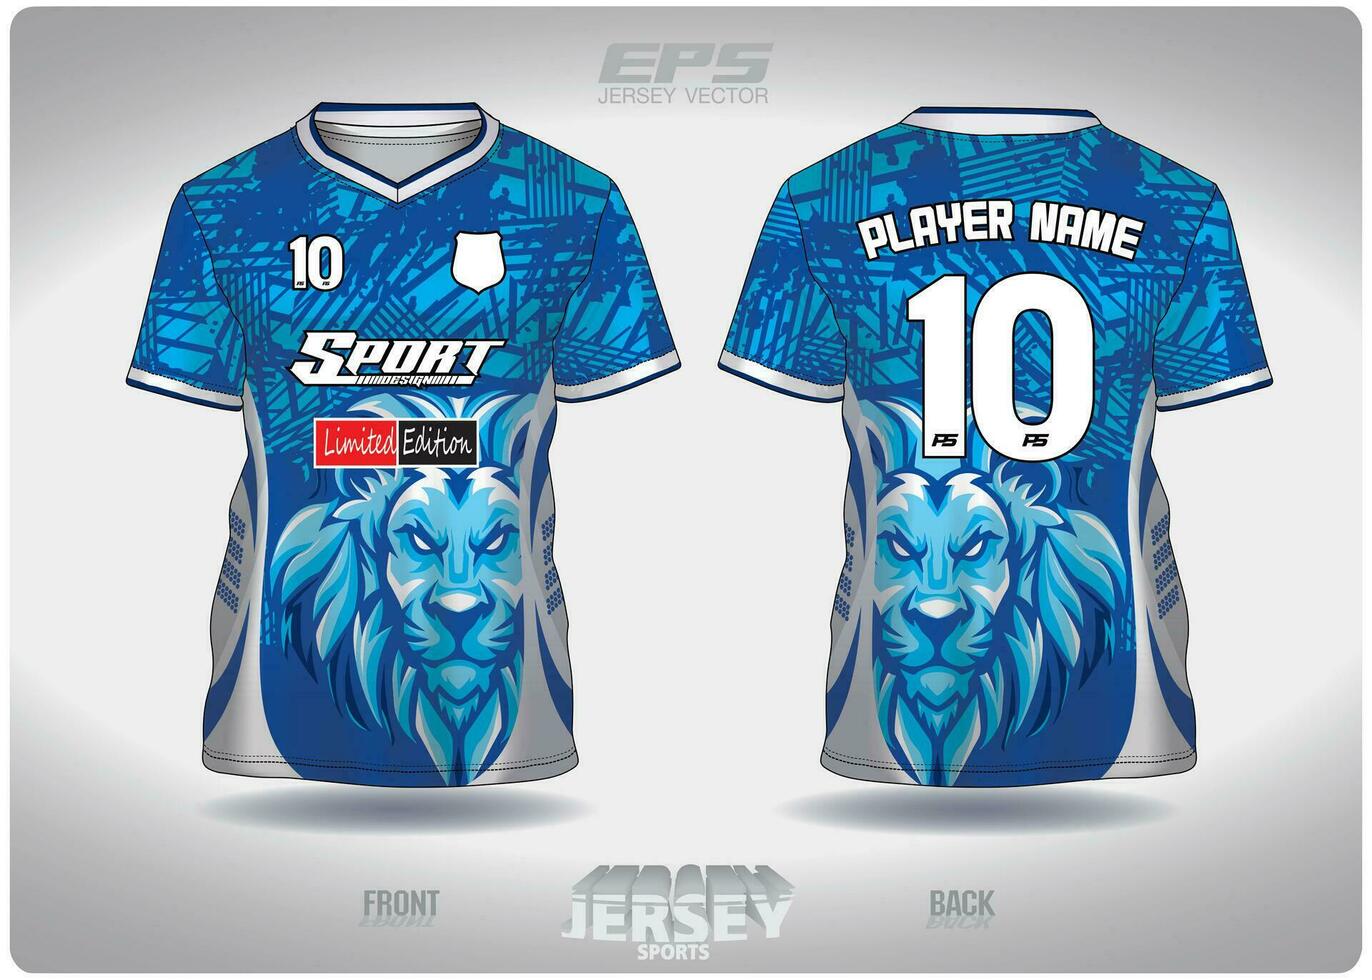 EPS jersey sports shirt vector.Lion blue and white pattern design, illustration, textile background for V-neck sports t-shirt, football jersey shirt vector